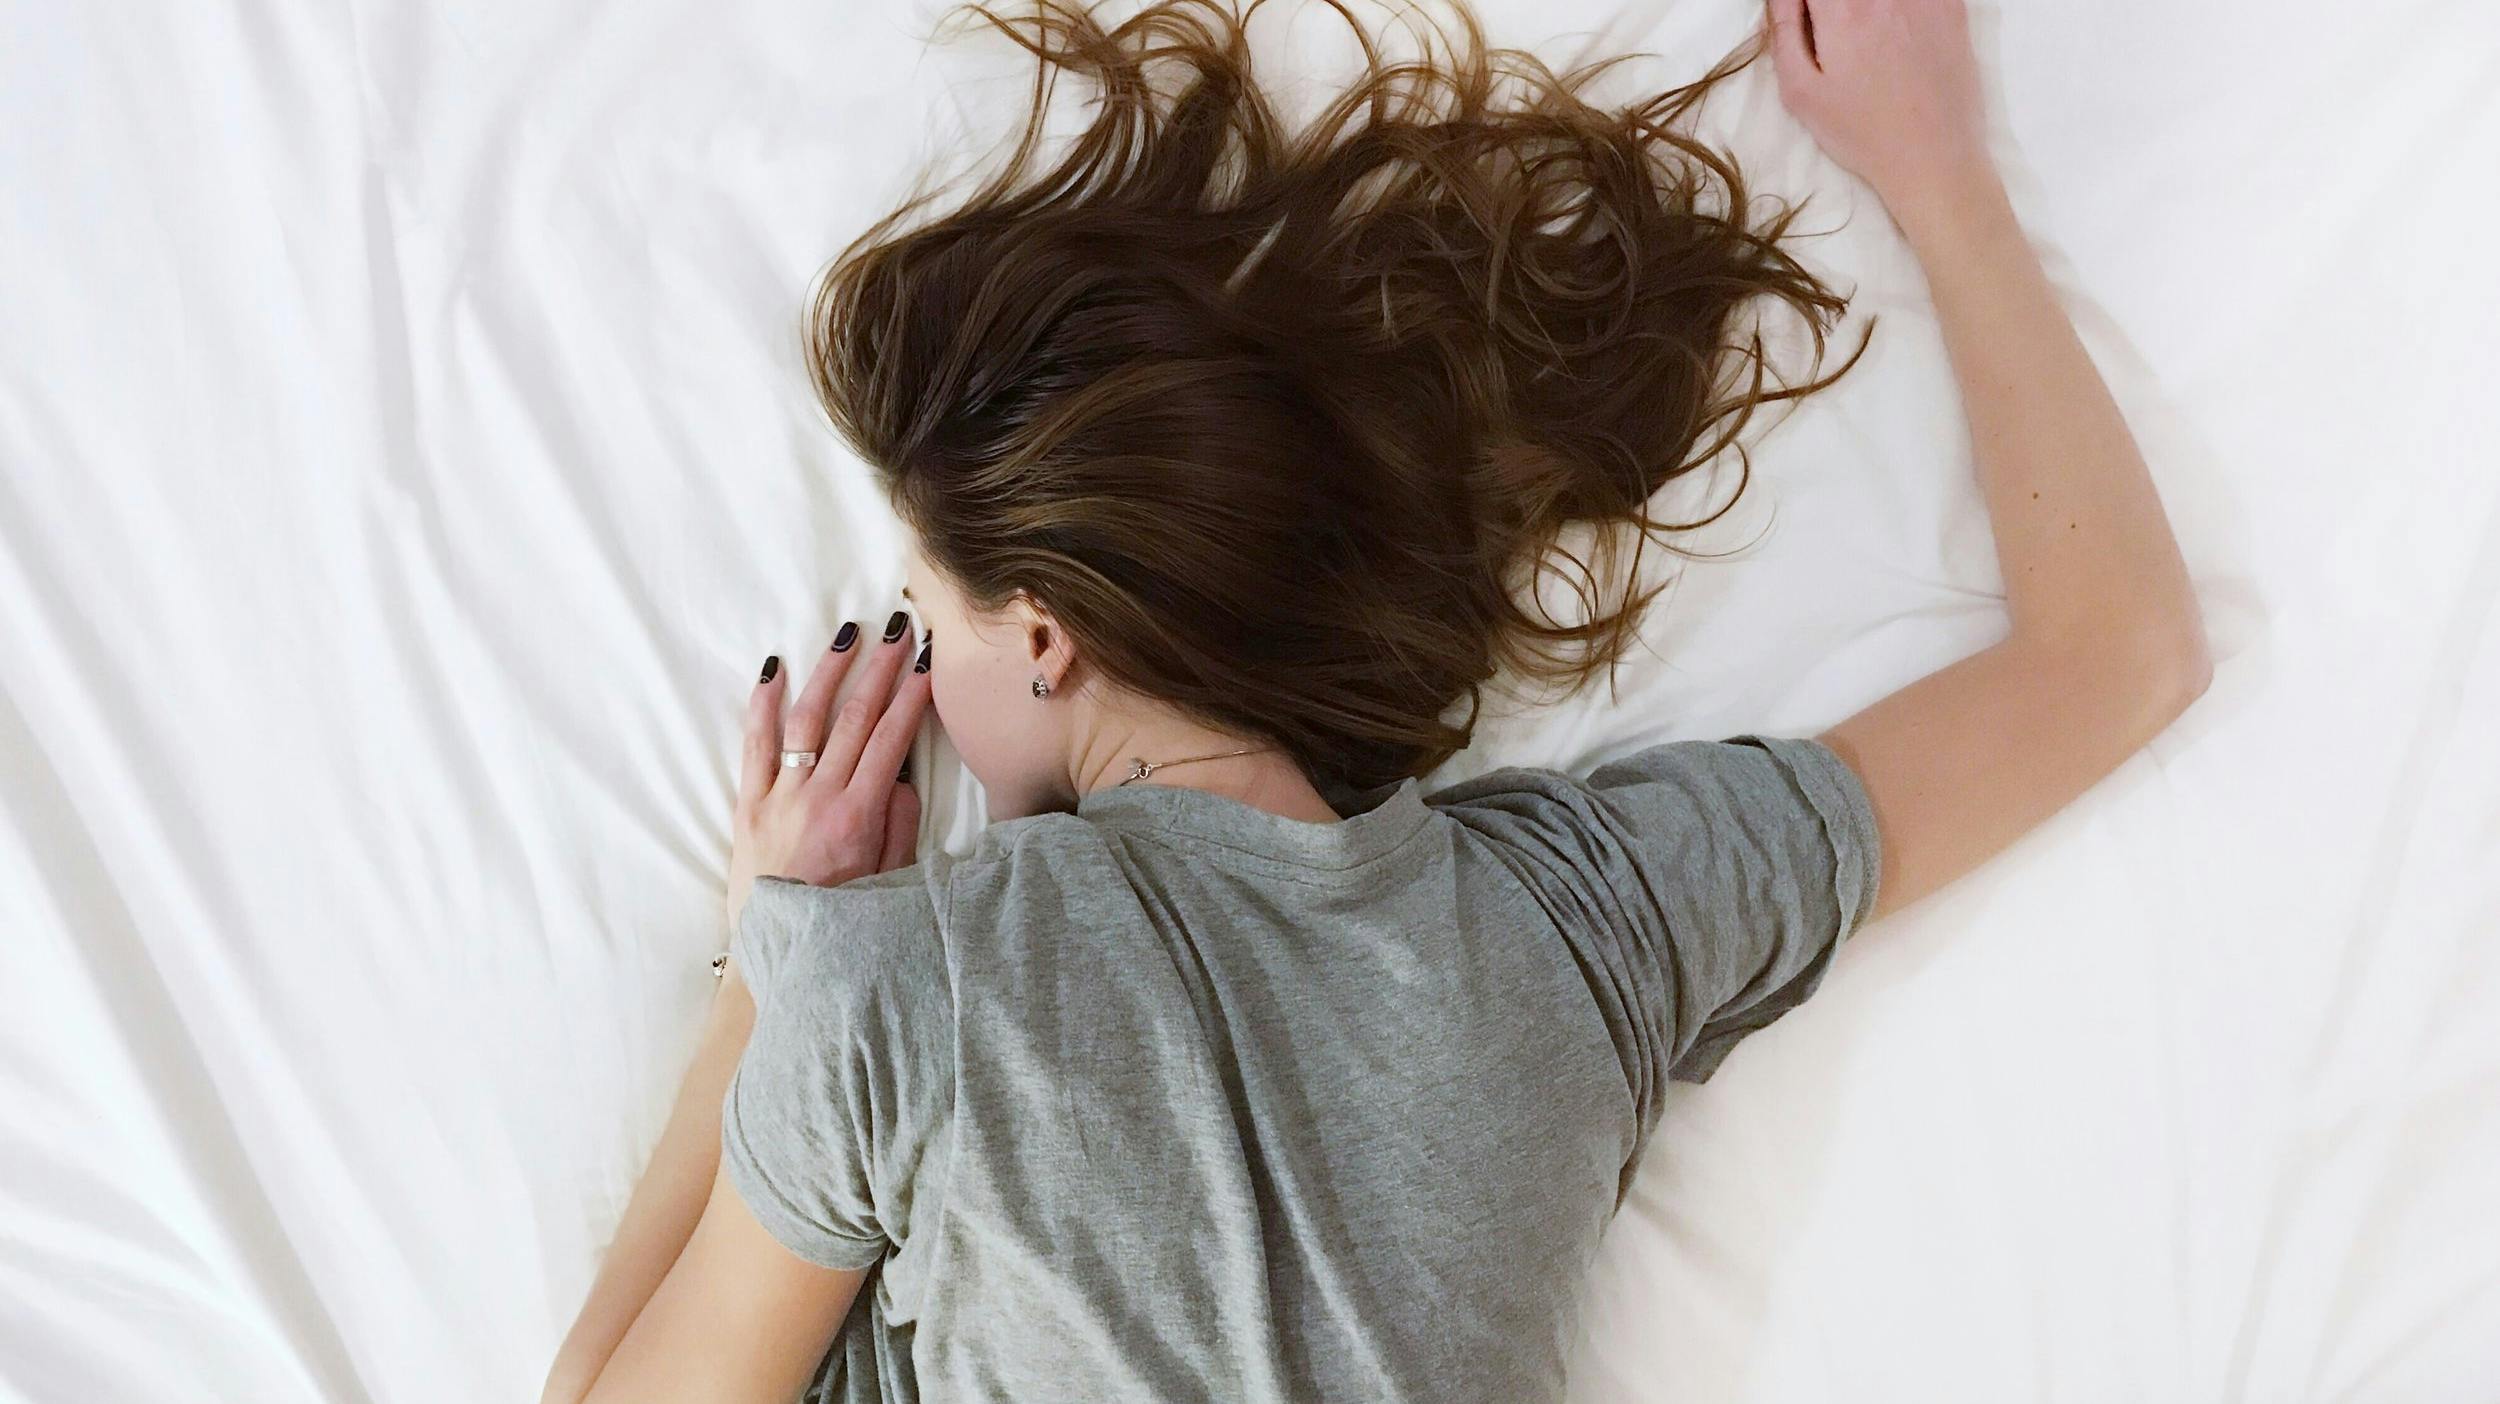 Woman wearing gray shirt laying face down in bed